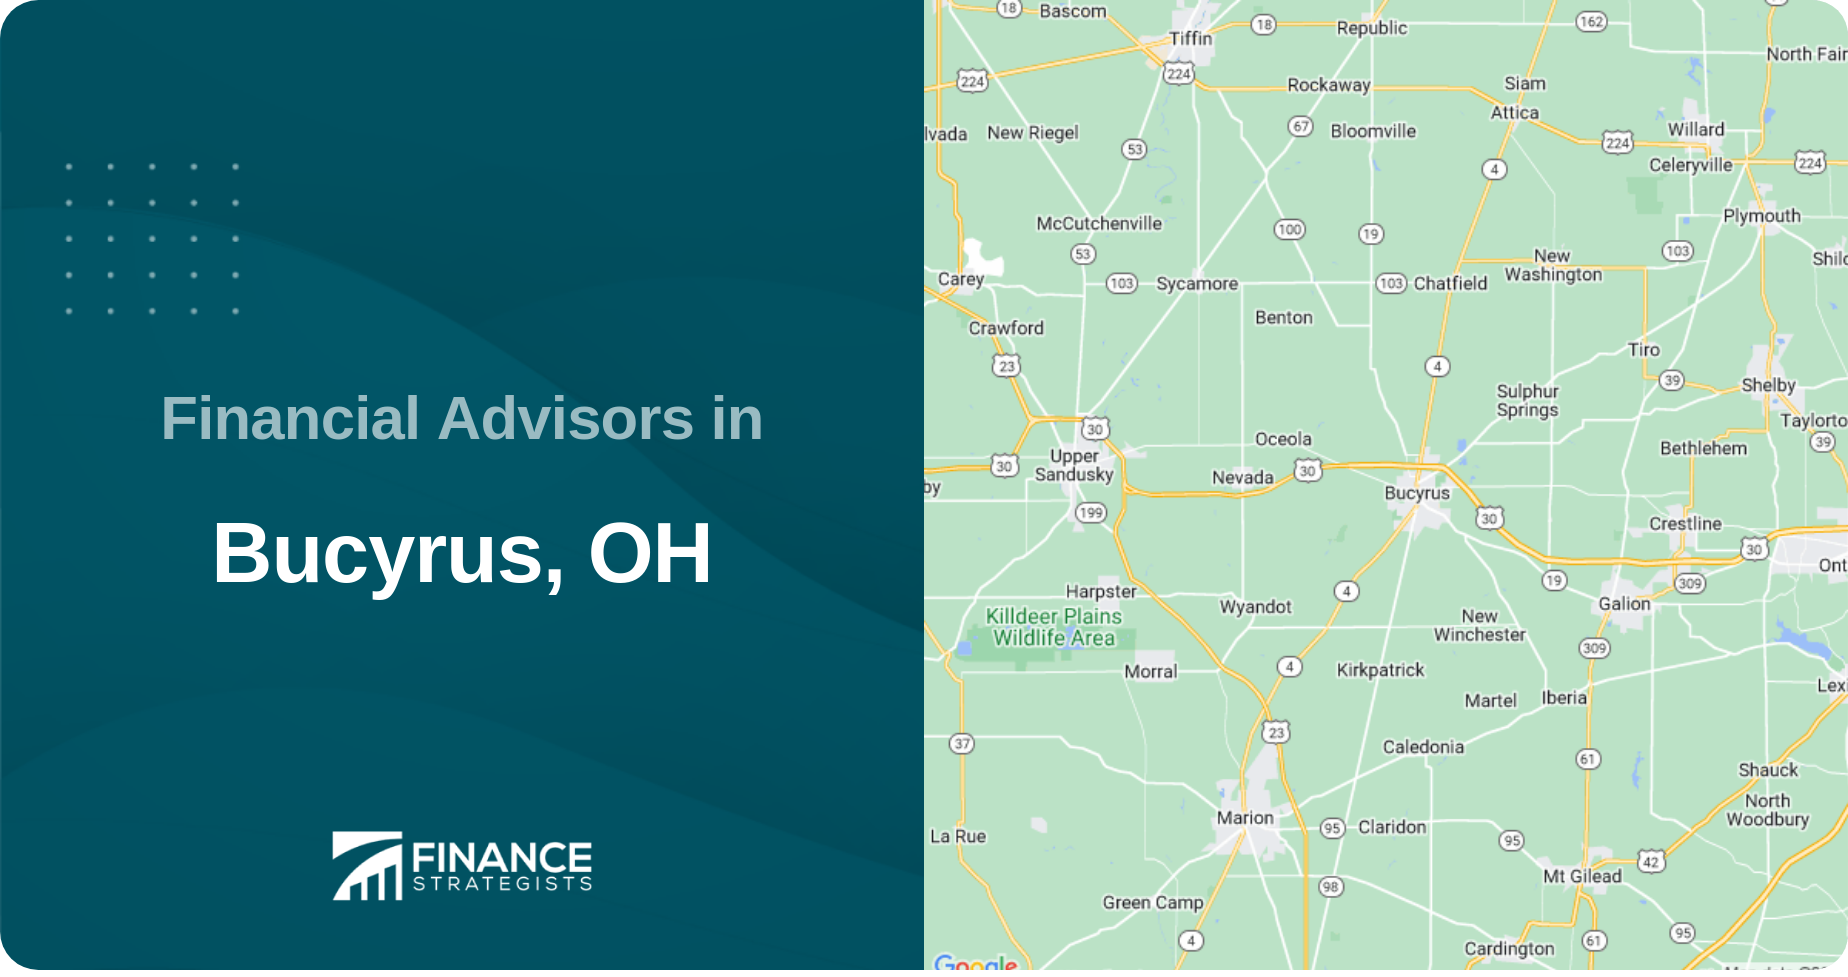 Financial Advisors in Bucyrus, OH